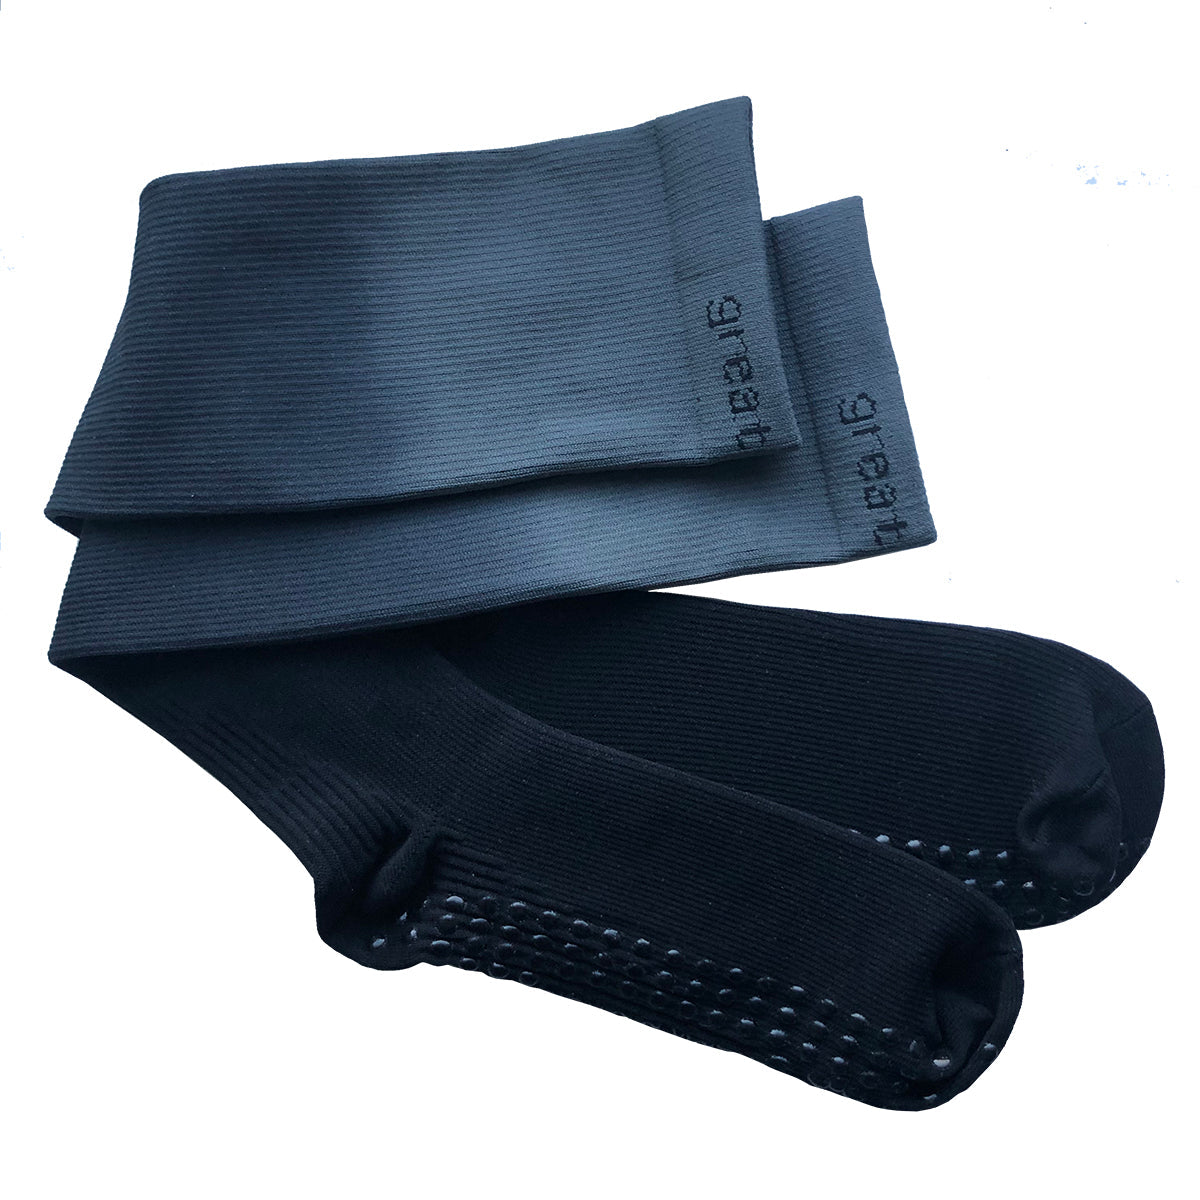 Compression Knee High Grip Sock in Ombre Dusk/Black - Great Soles